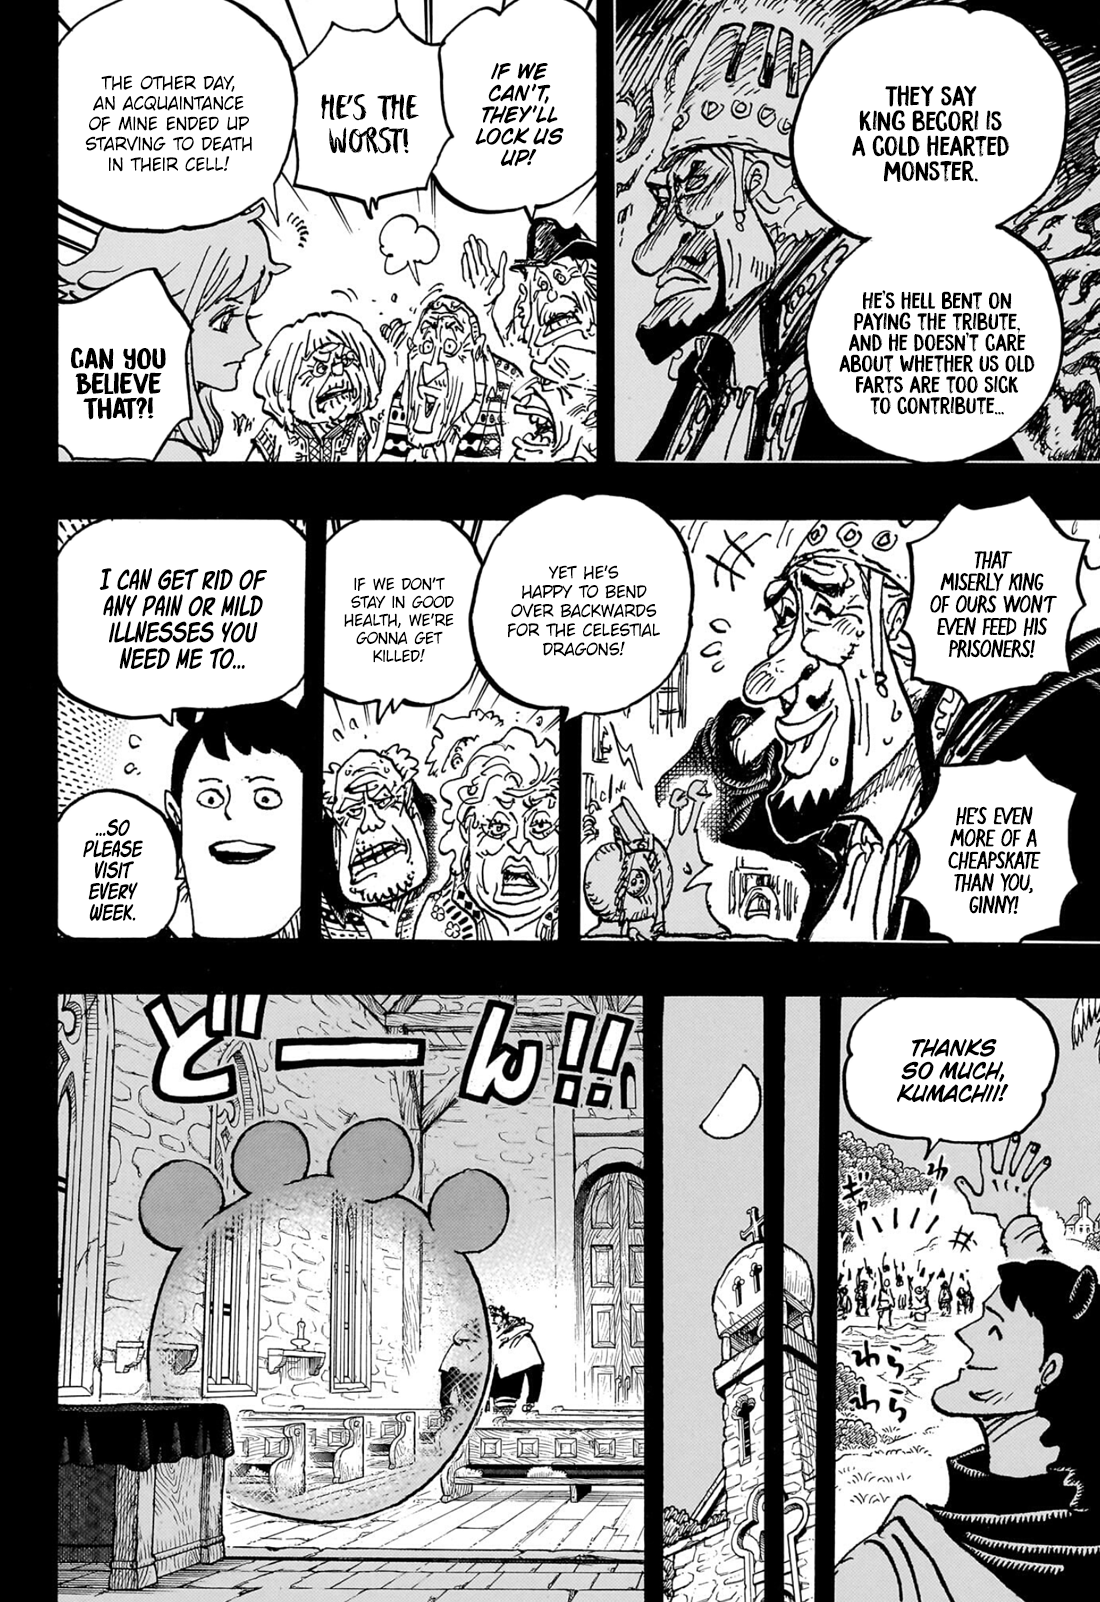 One Piece, Chapter 1062  TcbScans Org - Free Manga Online in High